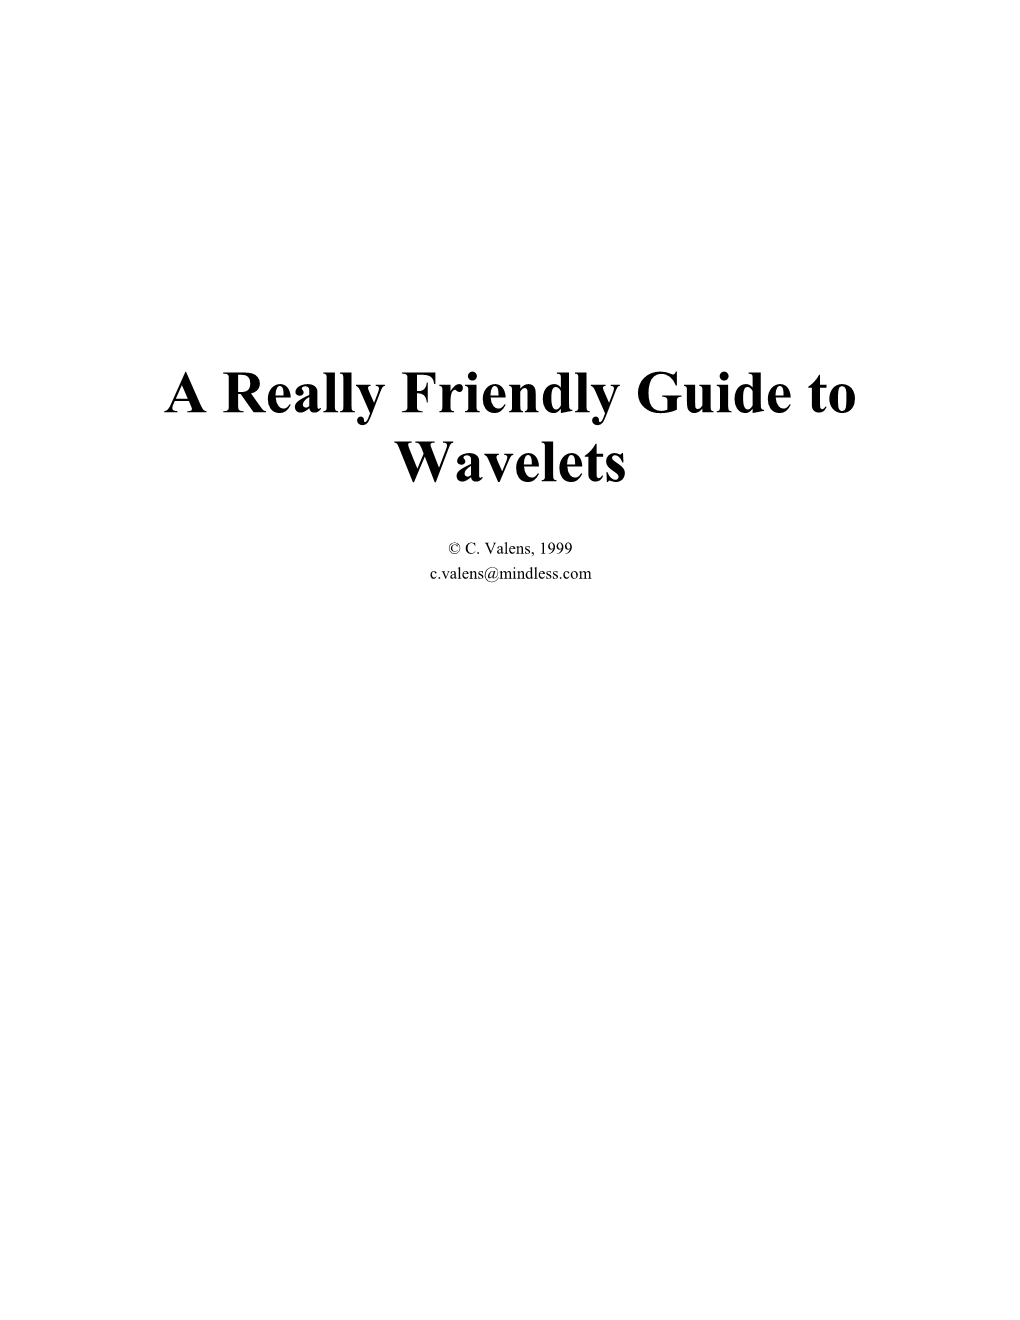 A Really Friendly Guide to Wavelets